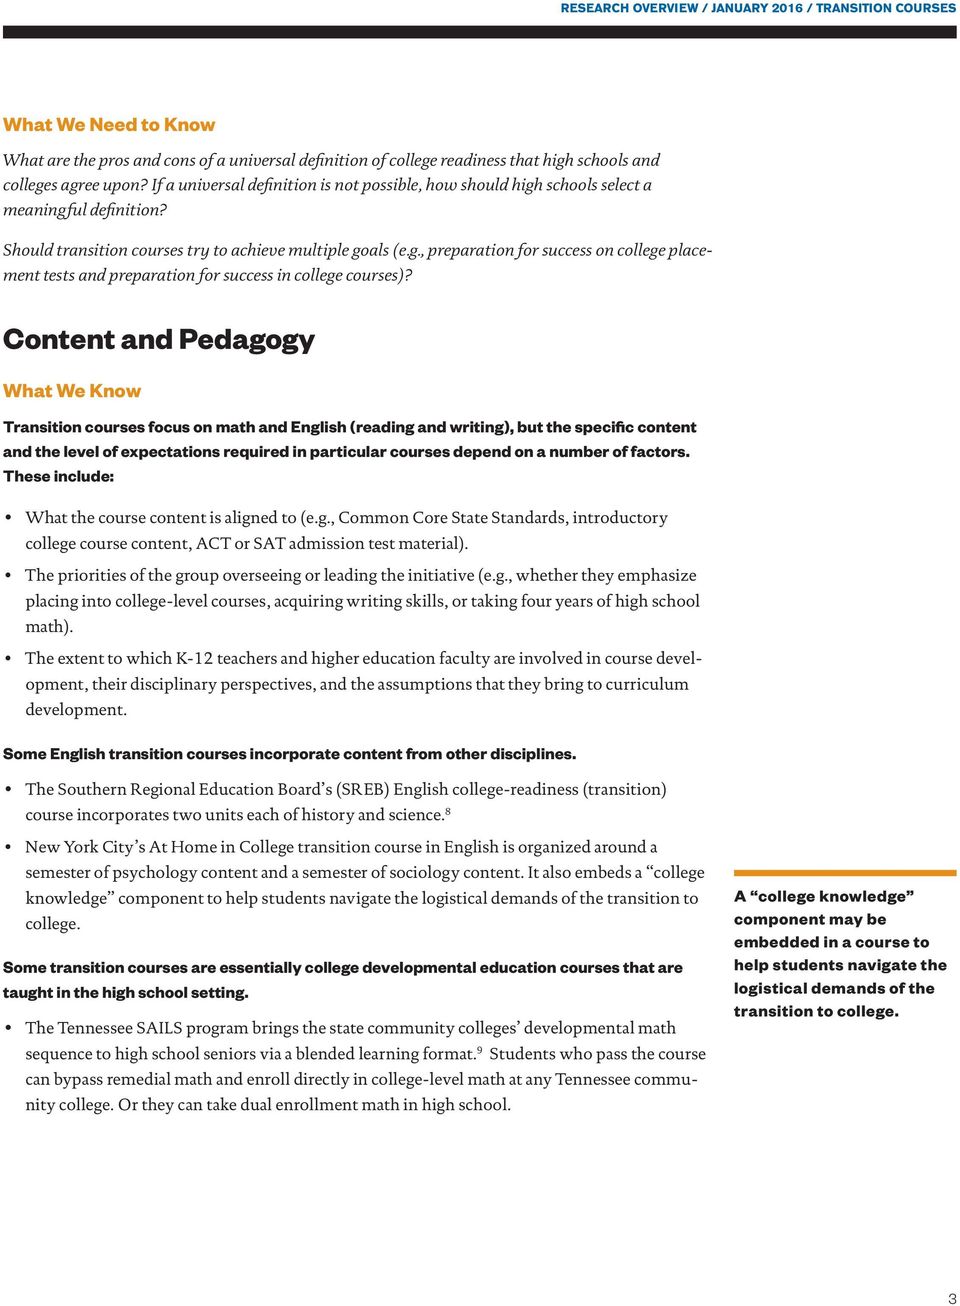 Content and Pedagogy Transition courses focus on math and English (reading and writing), but the specific content and the level of expectations required in particular courses depend on a number of